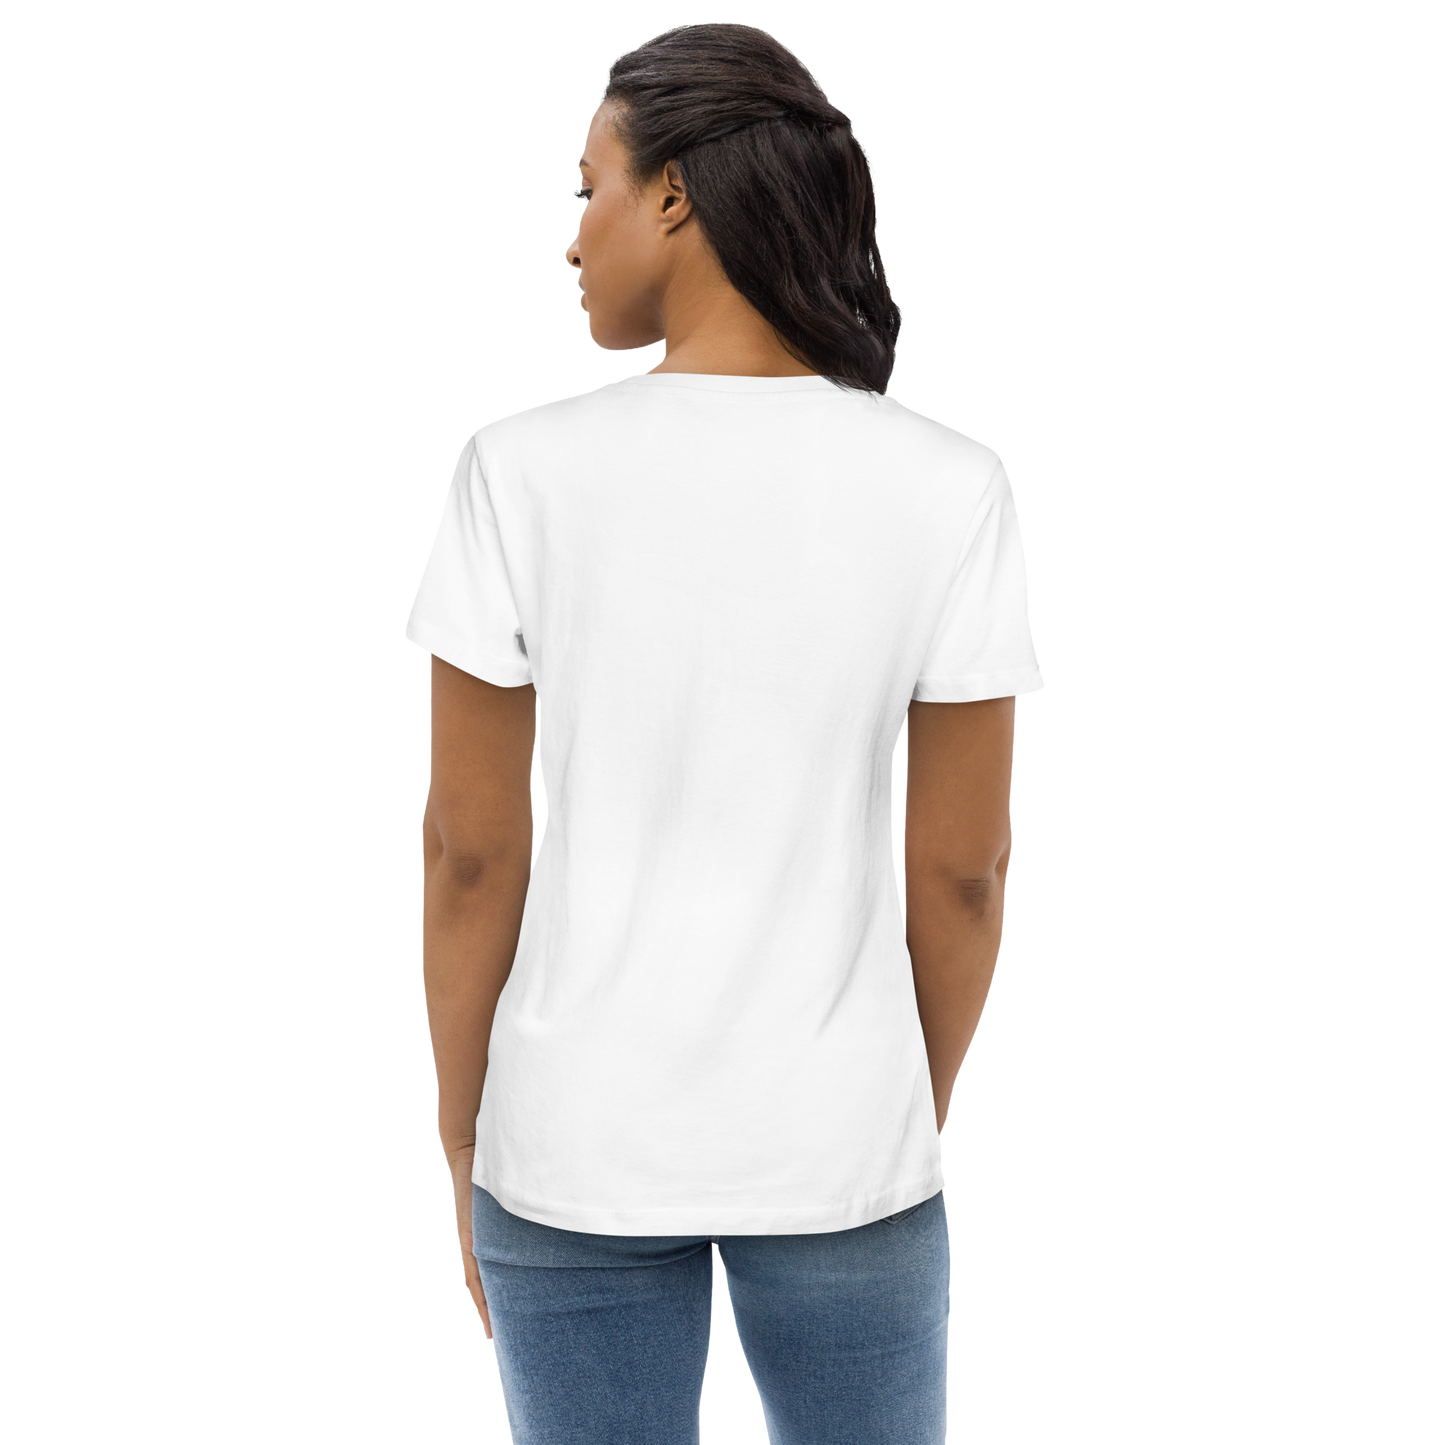 Gaia Women's fitted eco tee